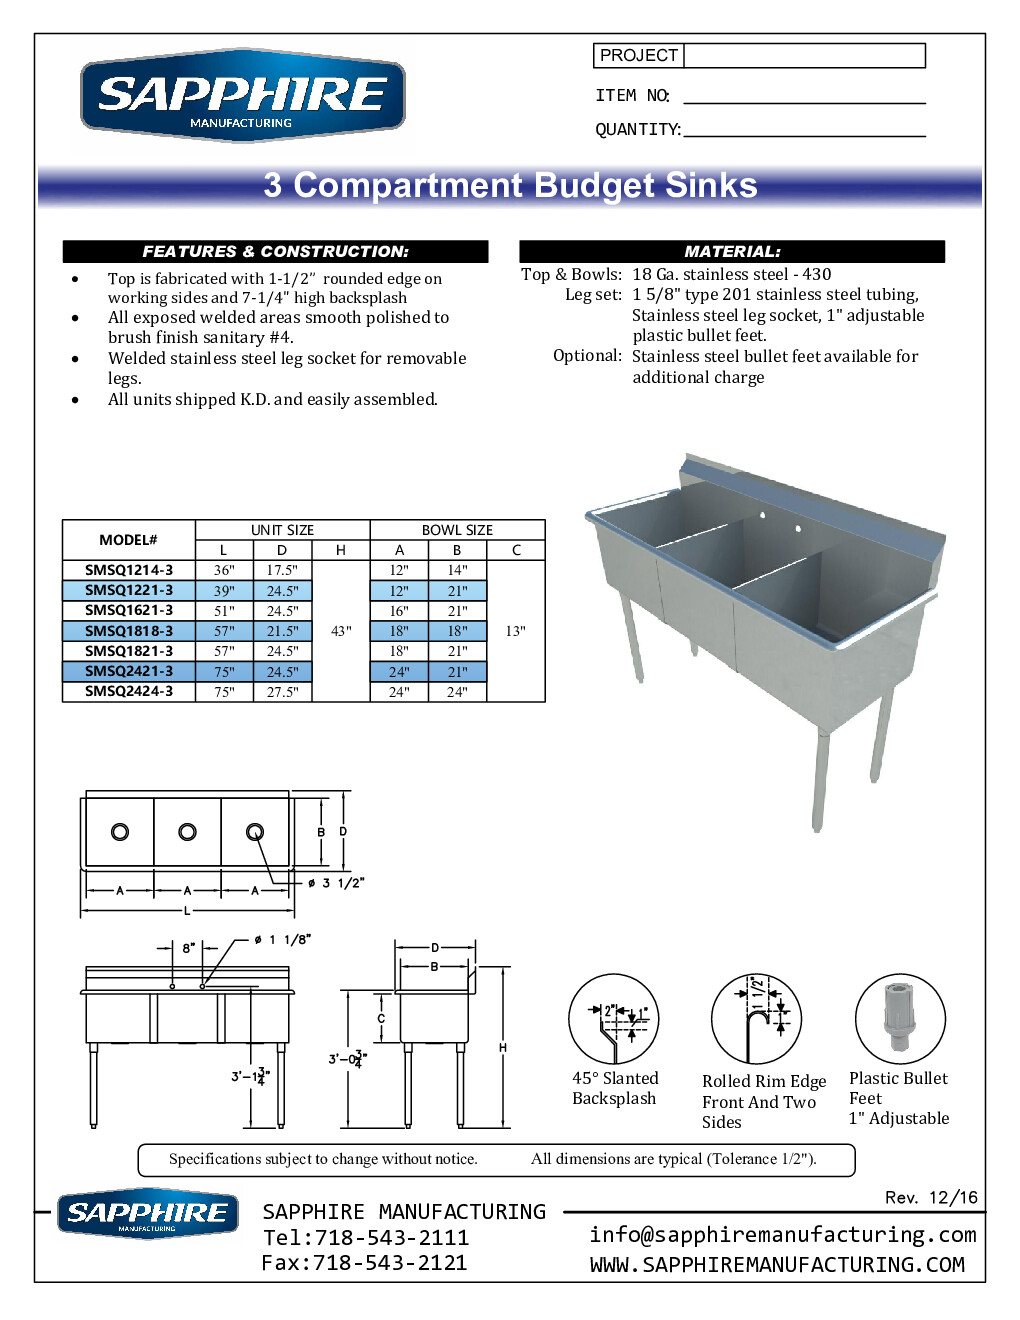 Sapphire Manufacturing SMSQ1821-3 (3) Three Compartment Sink